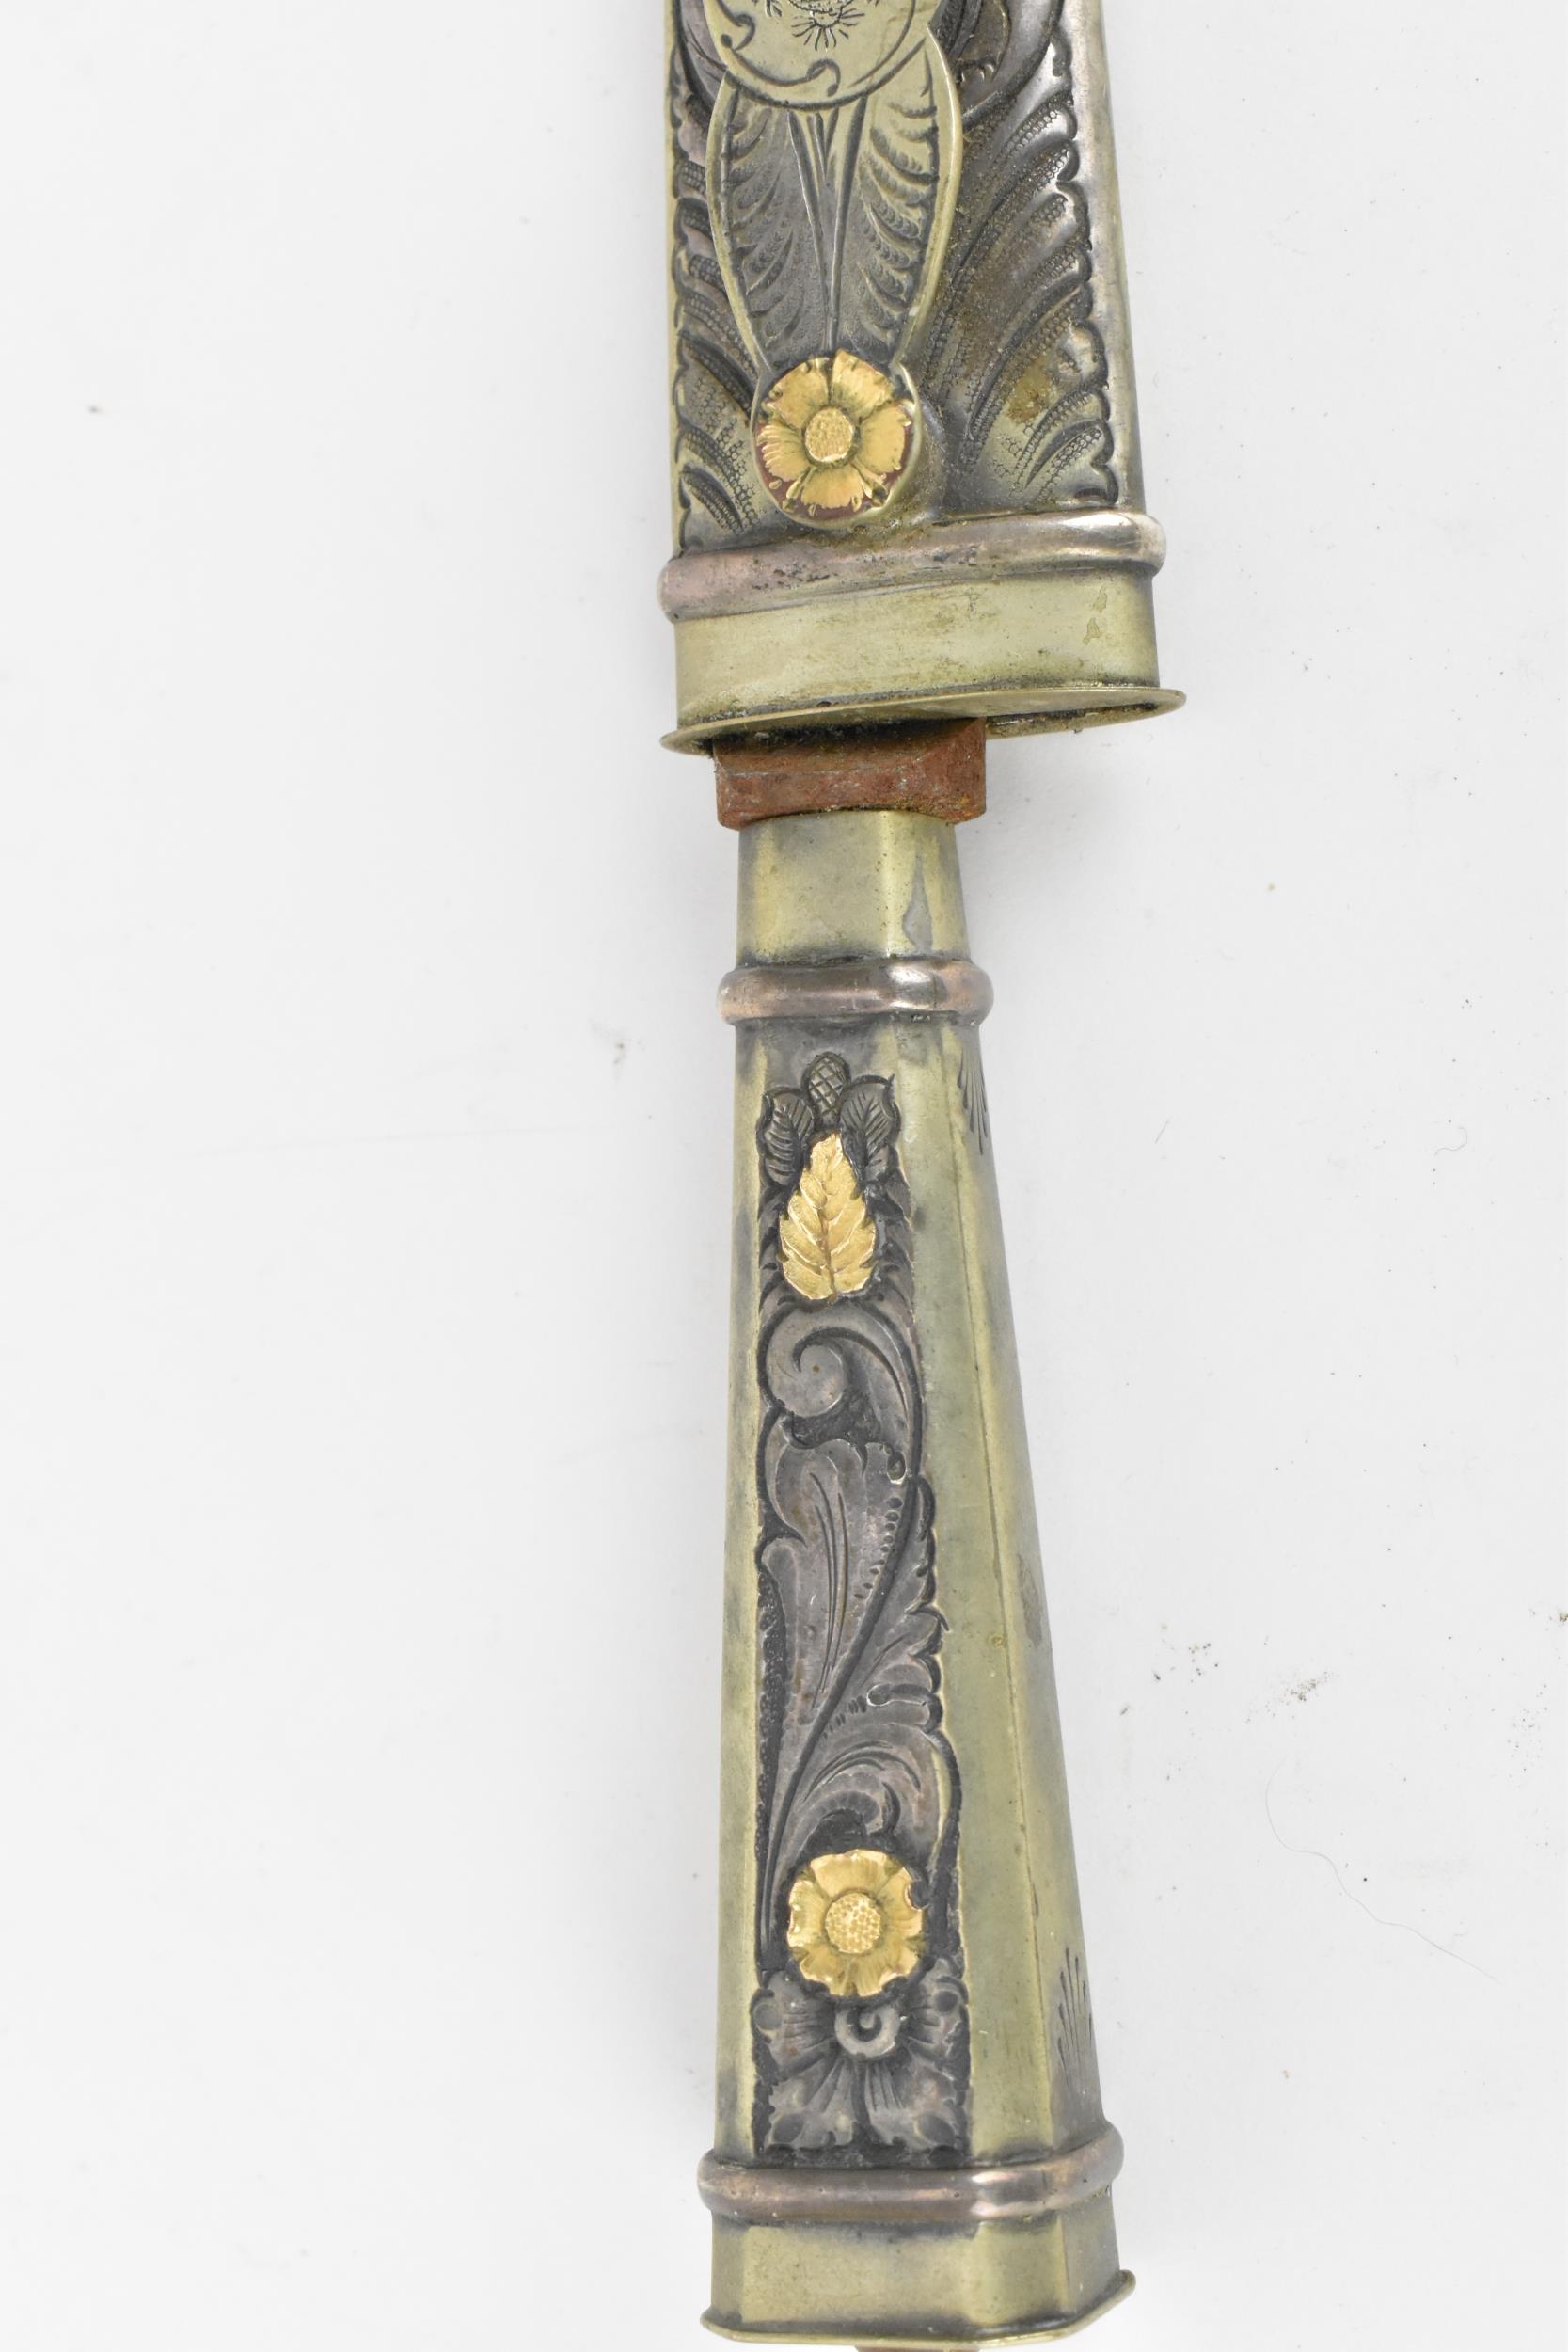 A German Heinr Boker and Co Soligen-Alemania Gaucho knife/dagger, with floral and acanthus etched - Image 2 of 6